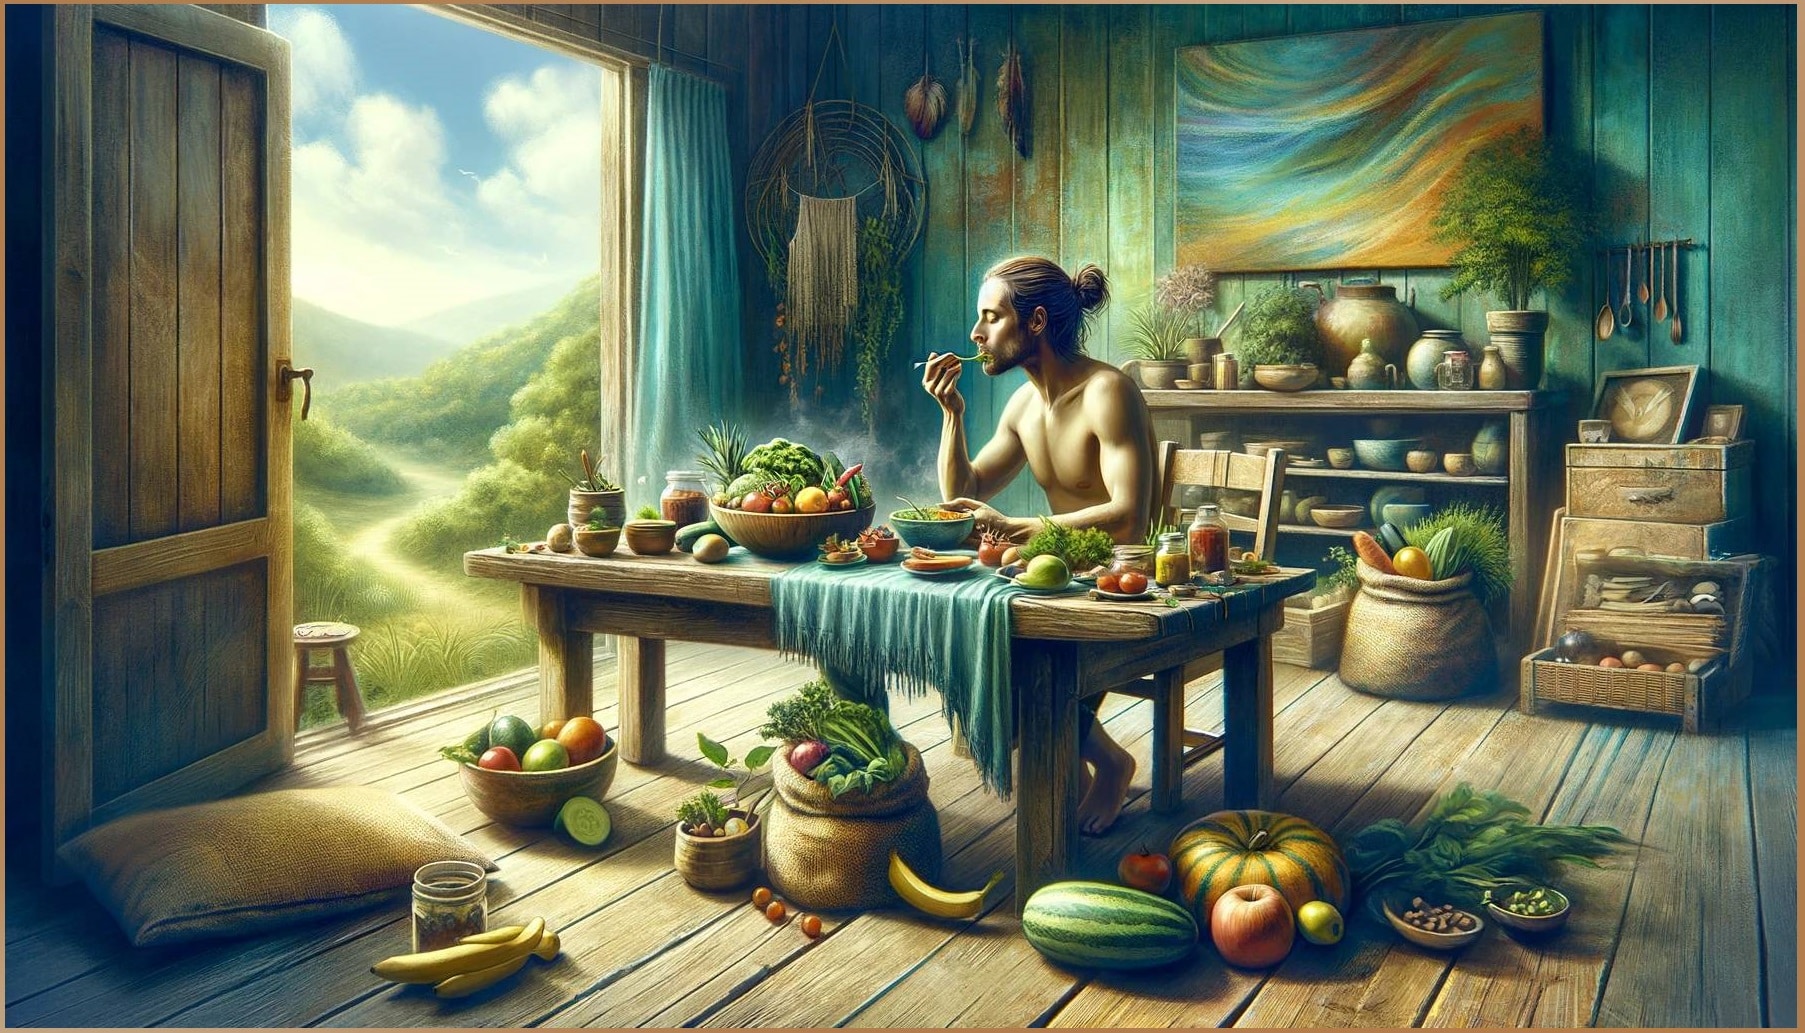 A serene scene of a person practicing slow living, enjoying a mindful meal in a rustic kitchen setting with fresh produce, embodying a healthy, slow lifestyle.